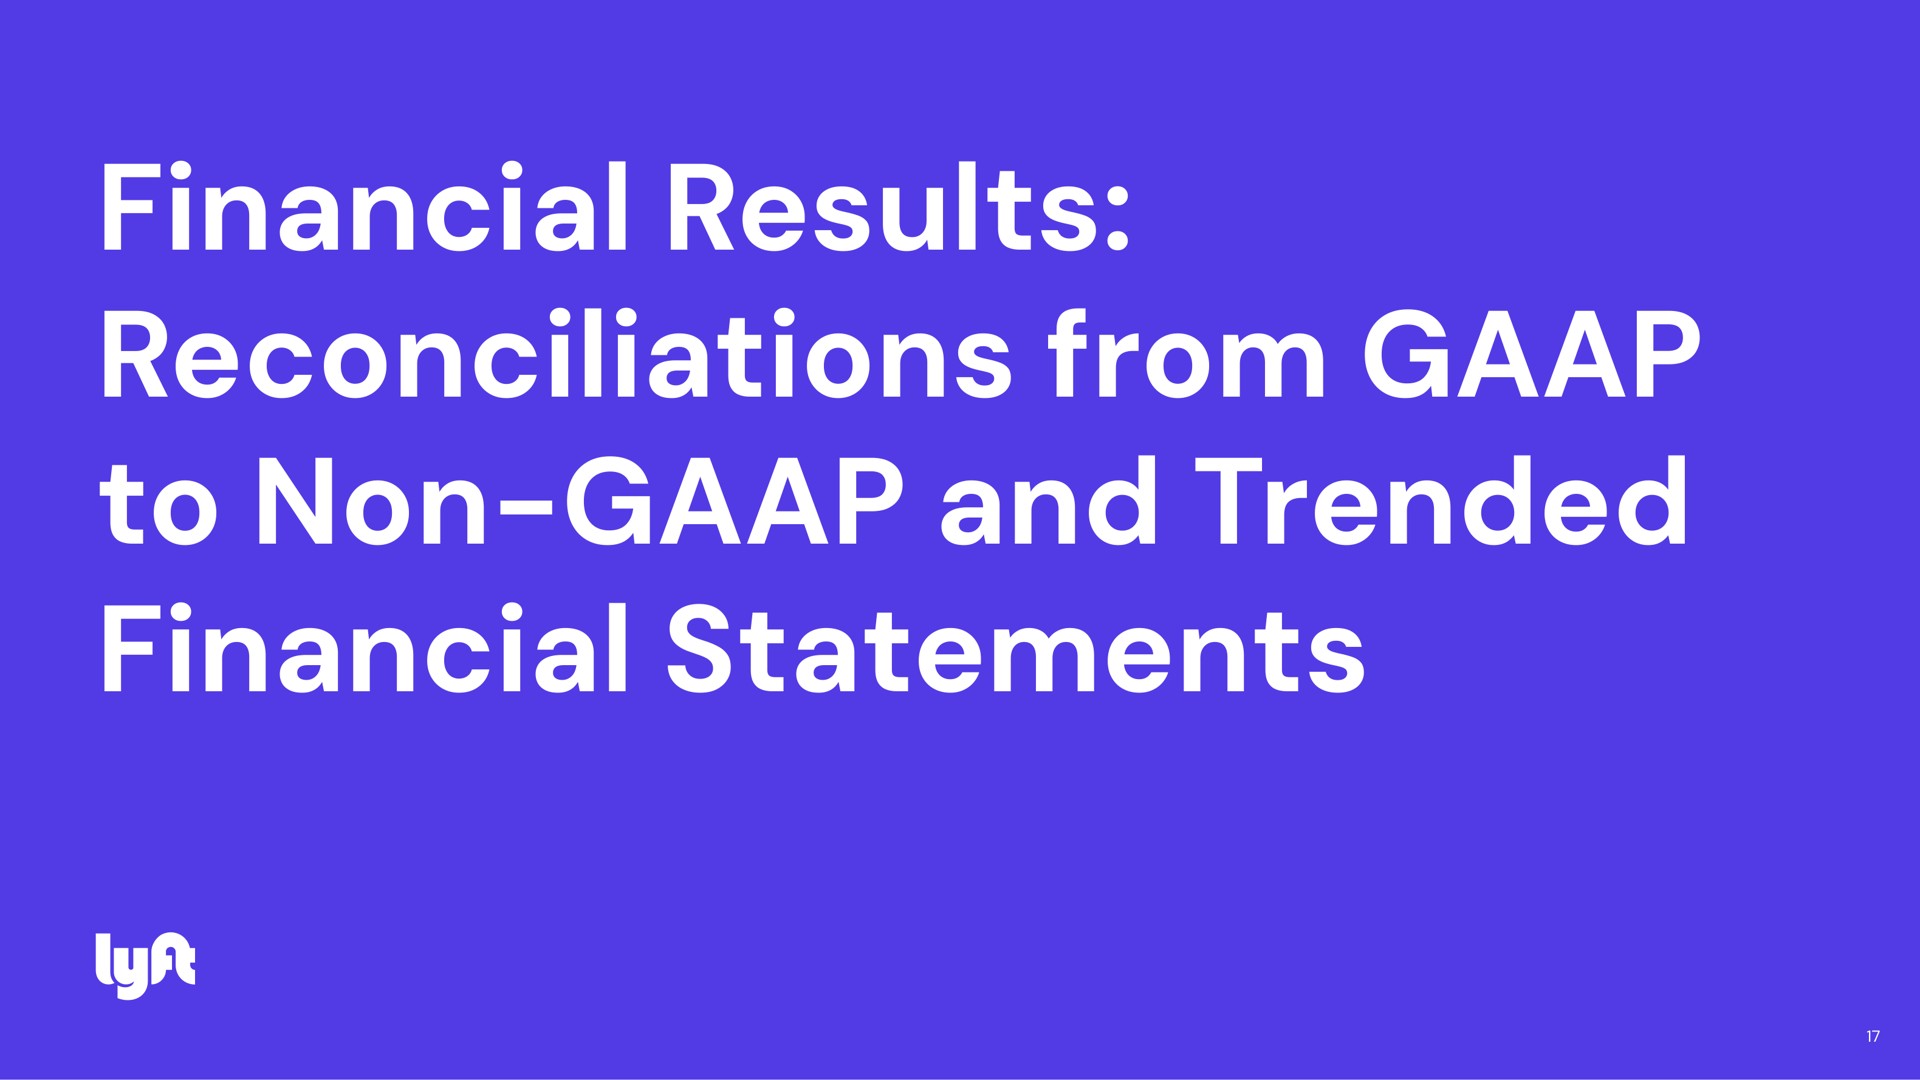 financial results reconciliations from to non and trended financial statements | Lyft